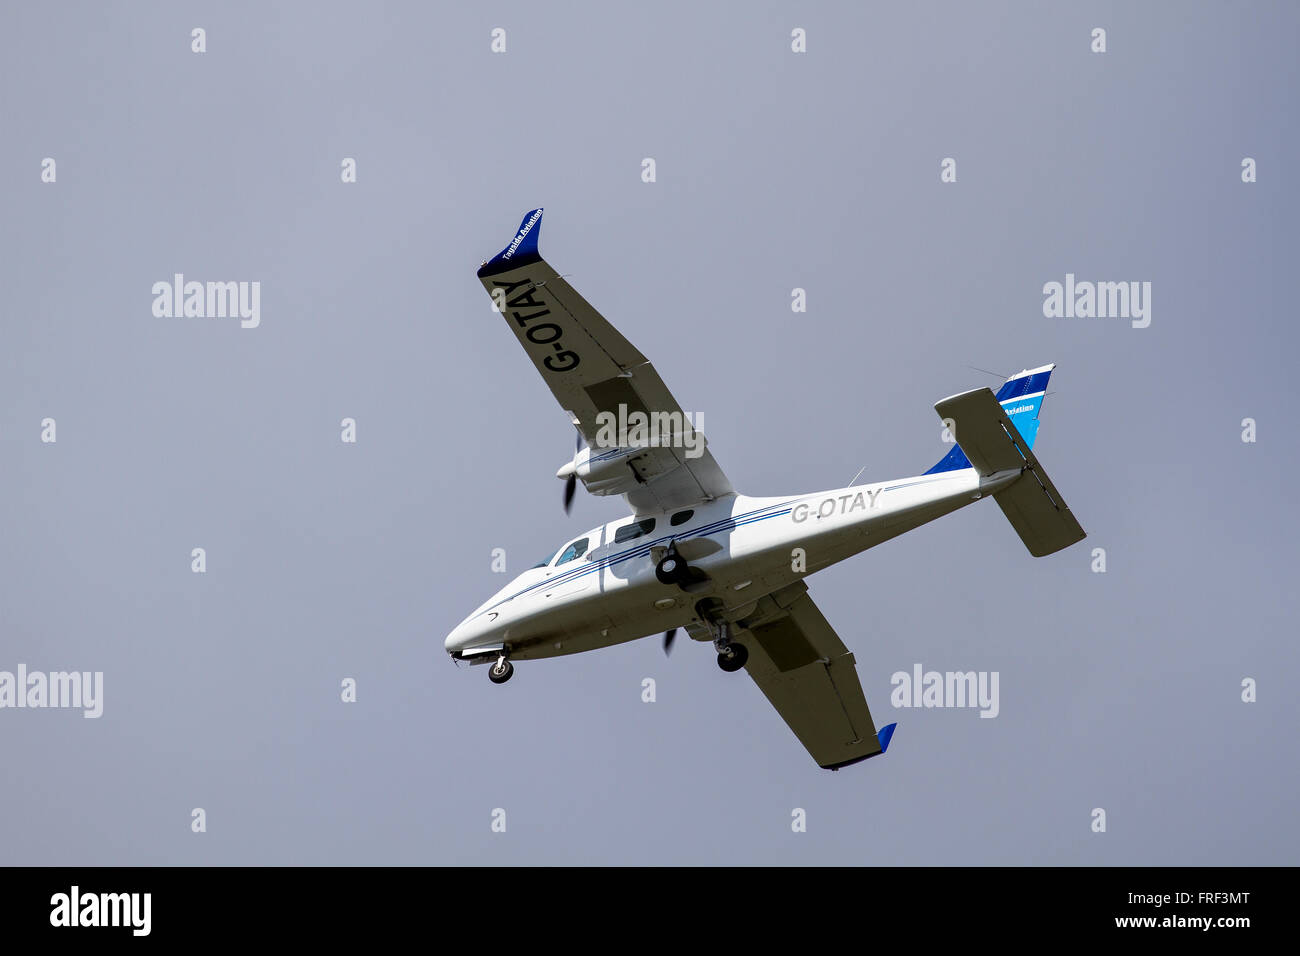 Tayside Aviation G-OTAY Tecnam P-2006T twin-engine aircraft flying overhead preparing to land at the Dundee airport, UK Stock Photo